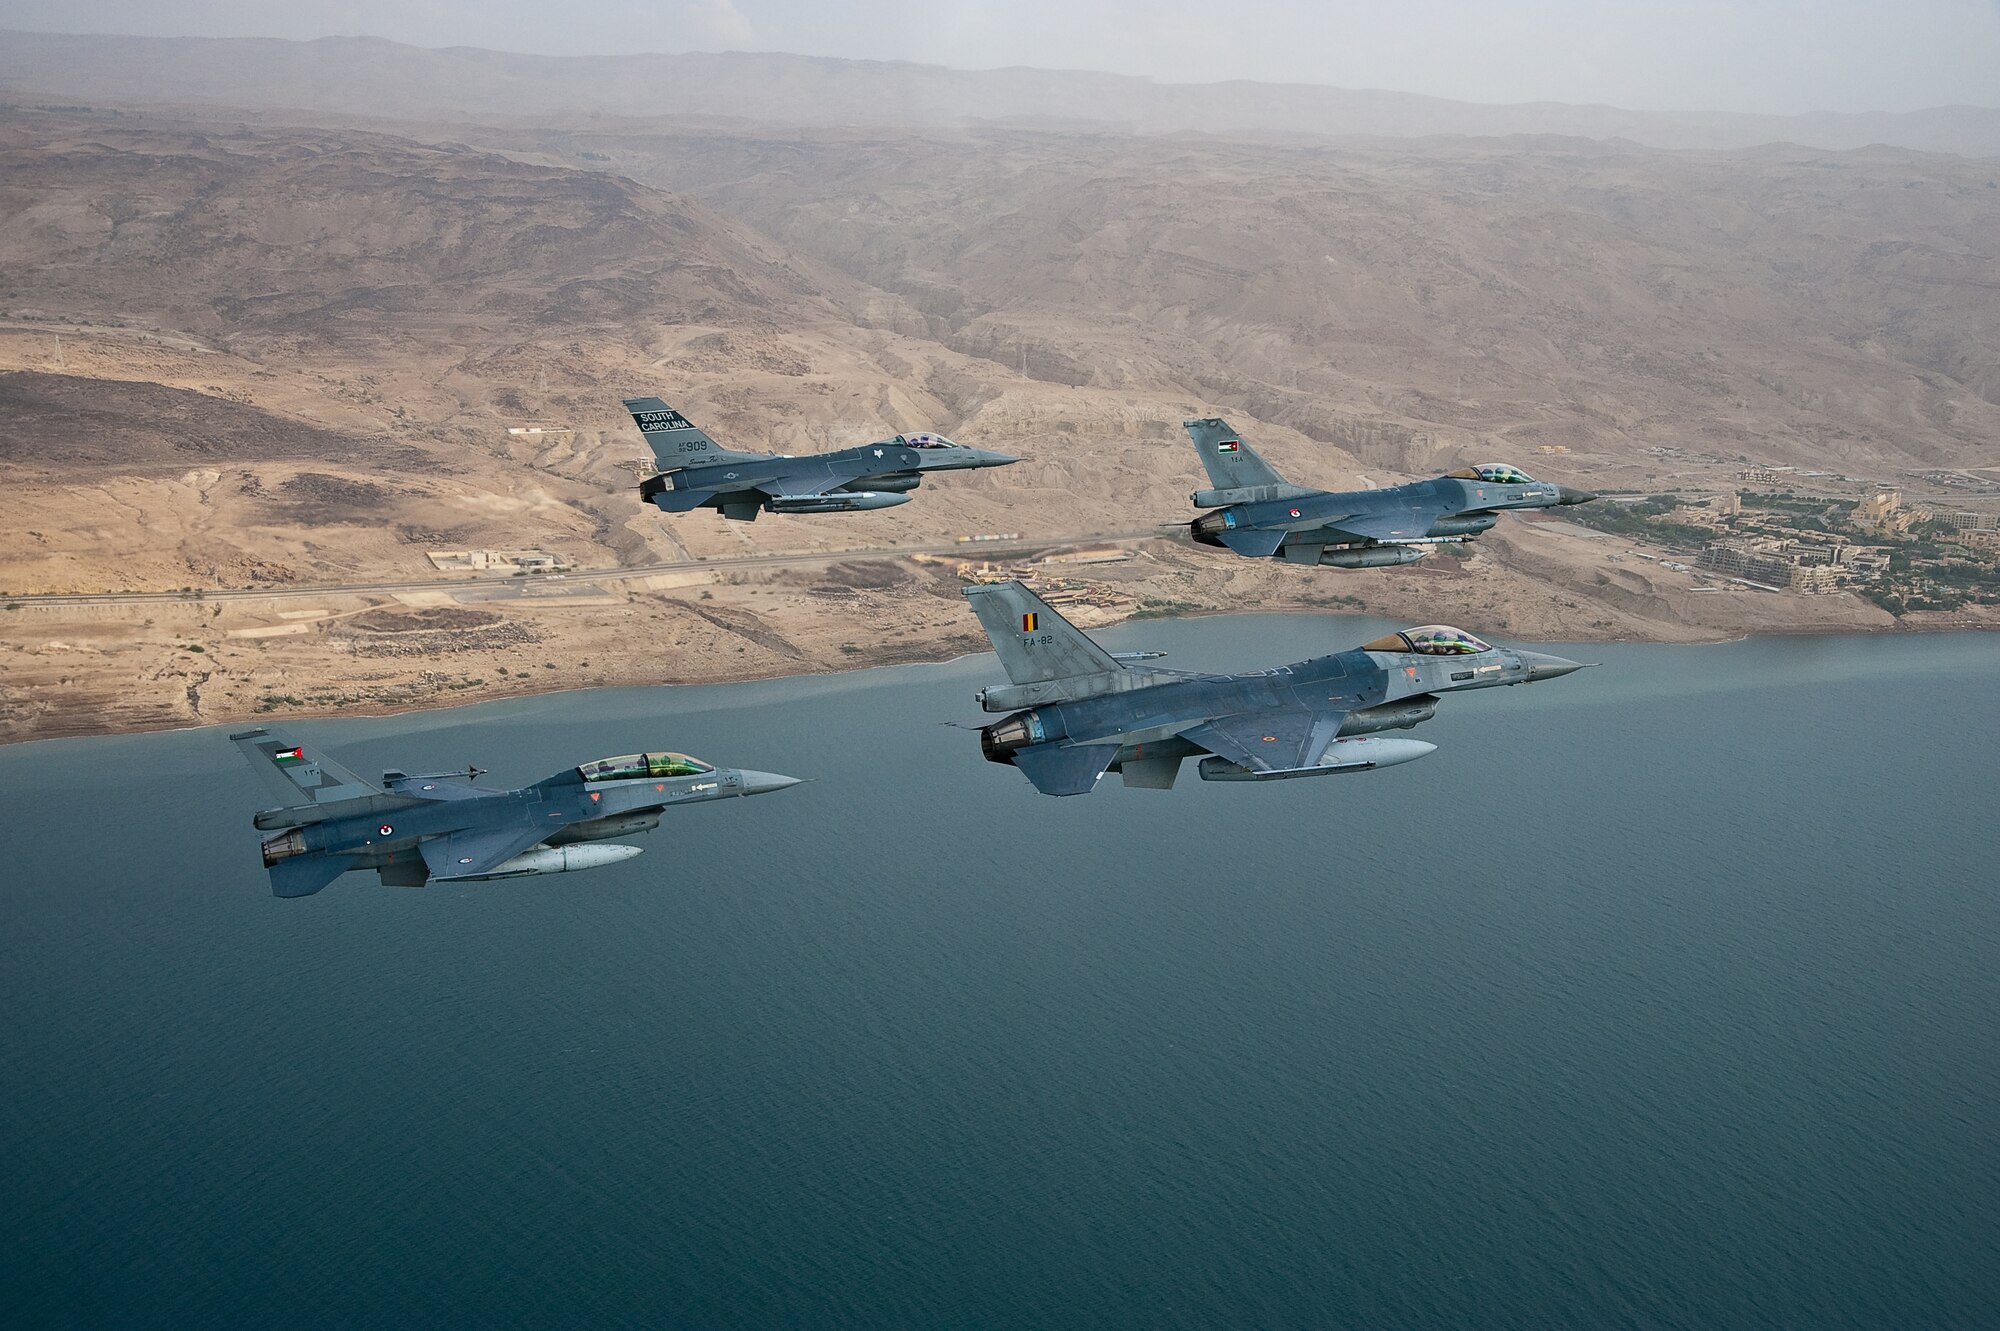 A diamond formation of F-16 Fighting Falcons flies over the Dead Sea, looking back on the coast of Jordan, during a formation flight with the three countries who were participating in the 2009 Falcon Air Meet, Belgium, United States, and Jordan. The Falcon Air Meet is an annual competition for countries around the world that fly F-16 Fighting Falcons.(Official U.S. Air Force photo by Capt. Darin Overstreet, Colorado National Guard/Released)